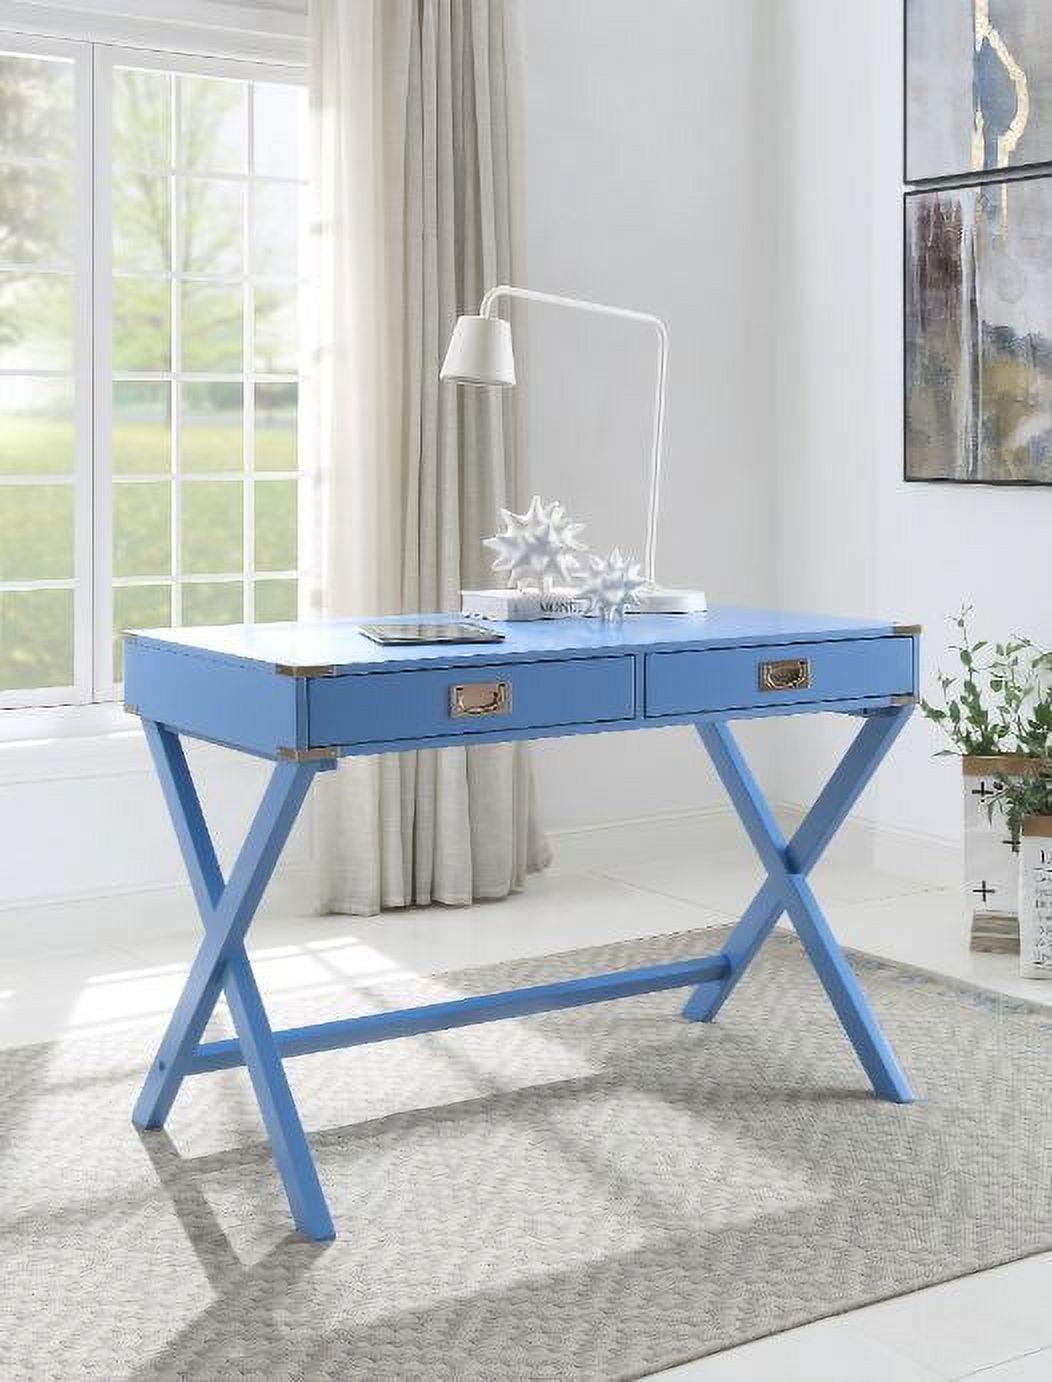 Amenia Blue Finish Rectangular Writing Desk with X-Shaped Base and Metal Accents